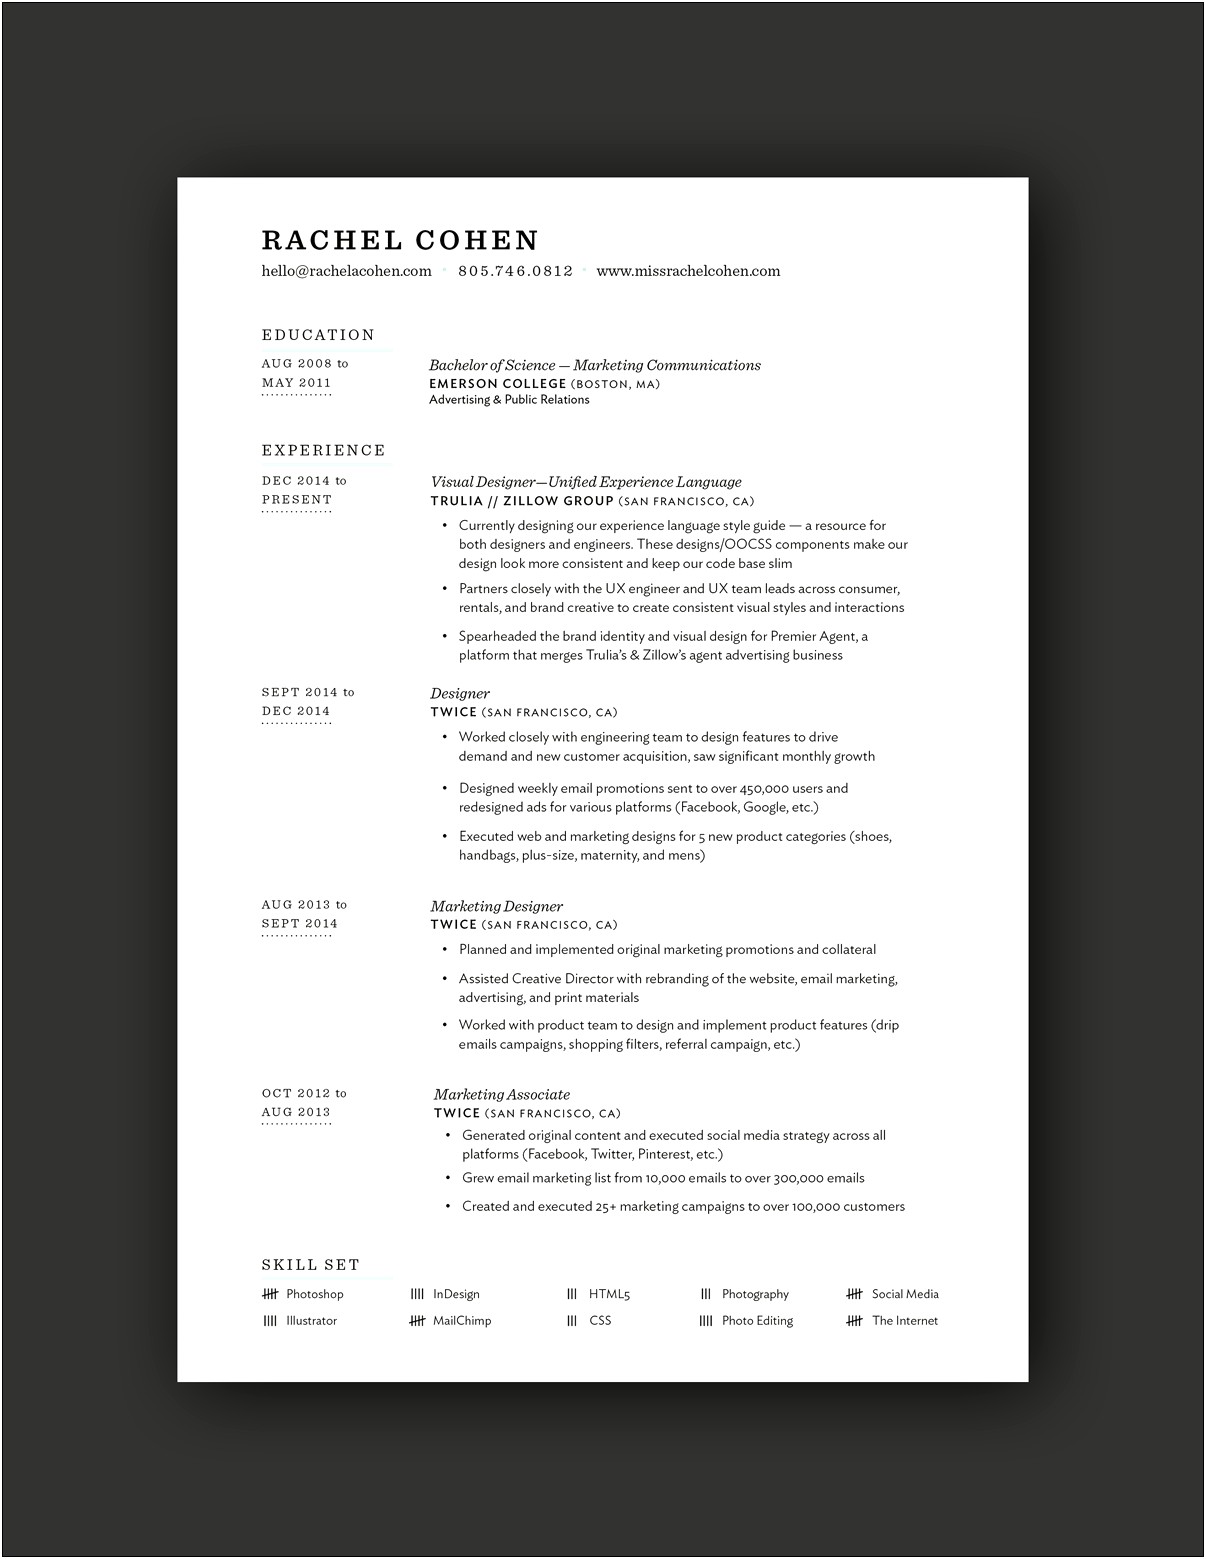 Resume Ideas For Copy Shop Worker